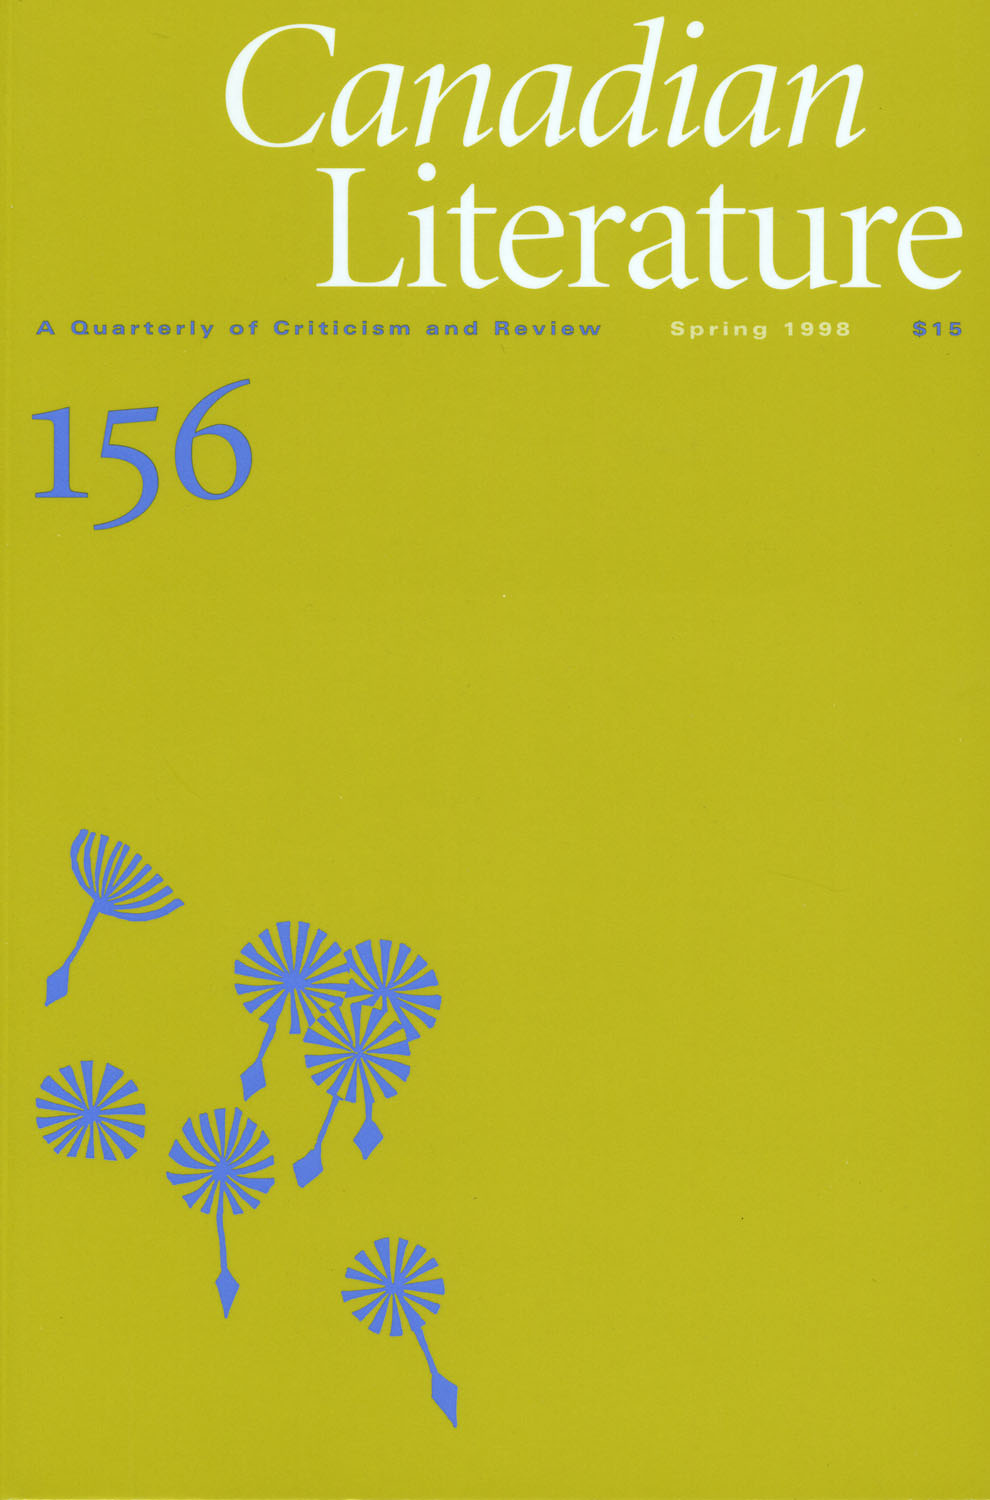 					View No. 156 (1998): Canadian Literature
				